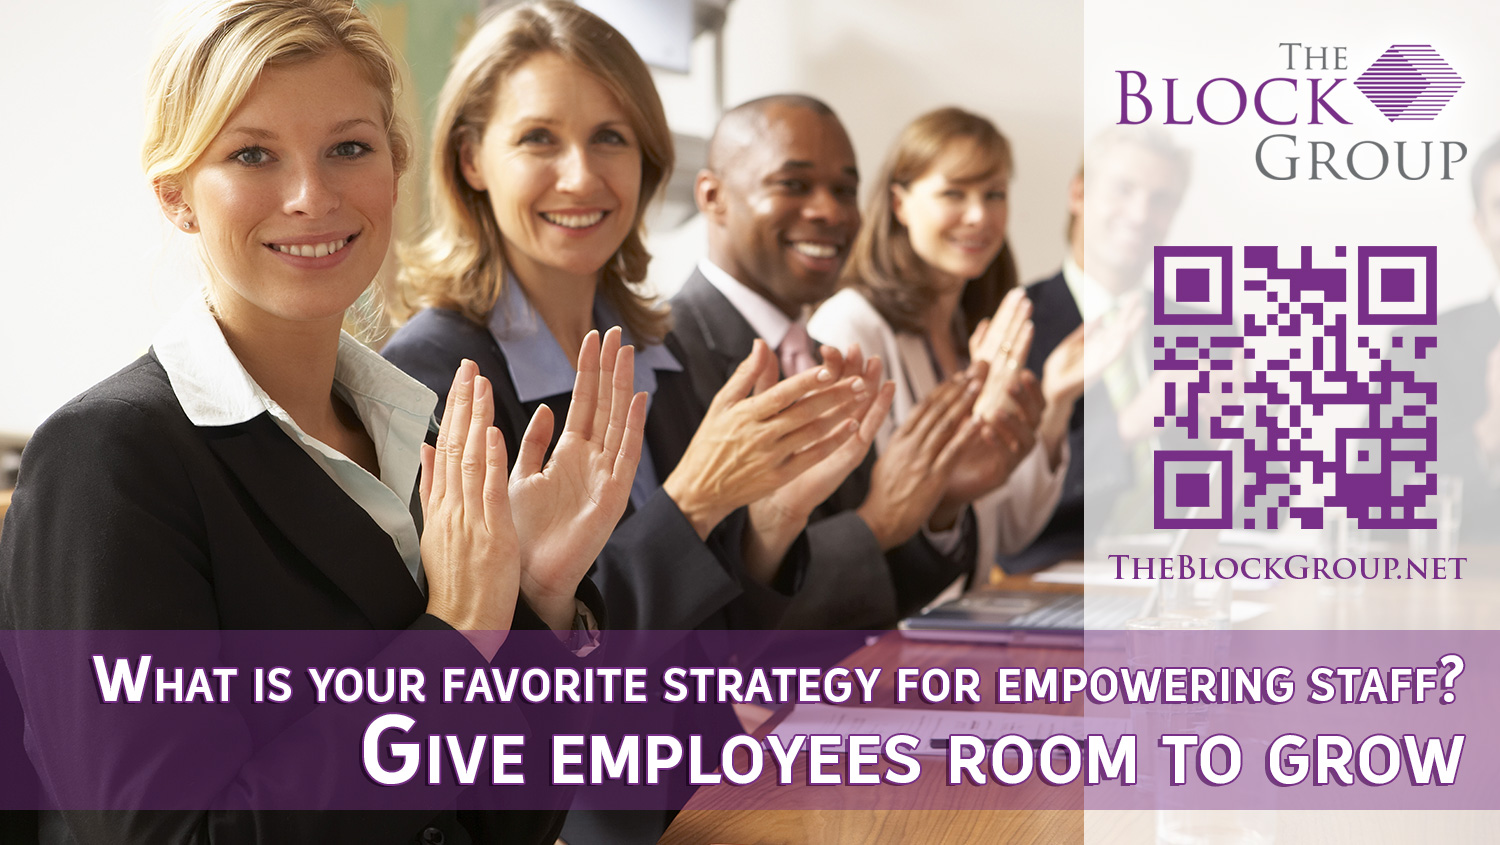 037-Give-employees-room-to-grow